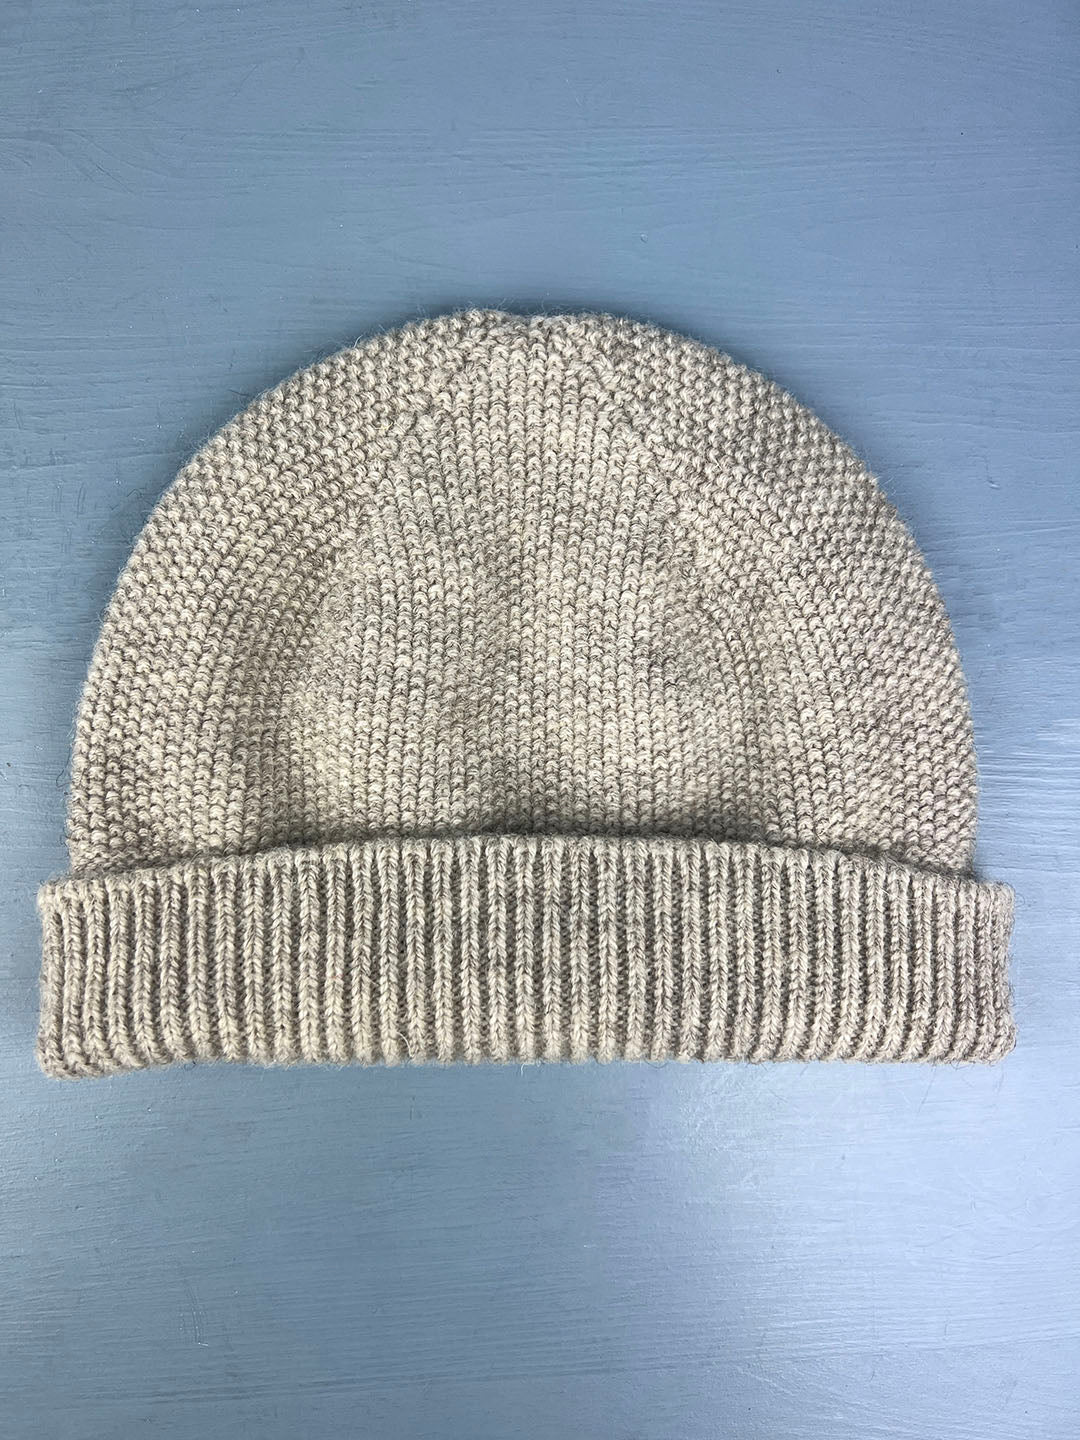 Textured knit hat in natural, un-dyed British wool.